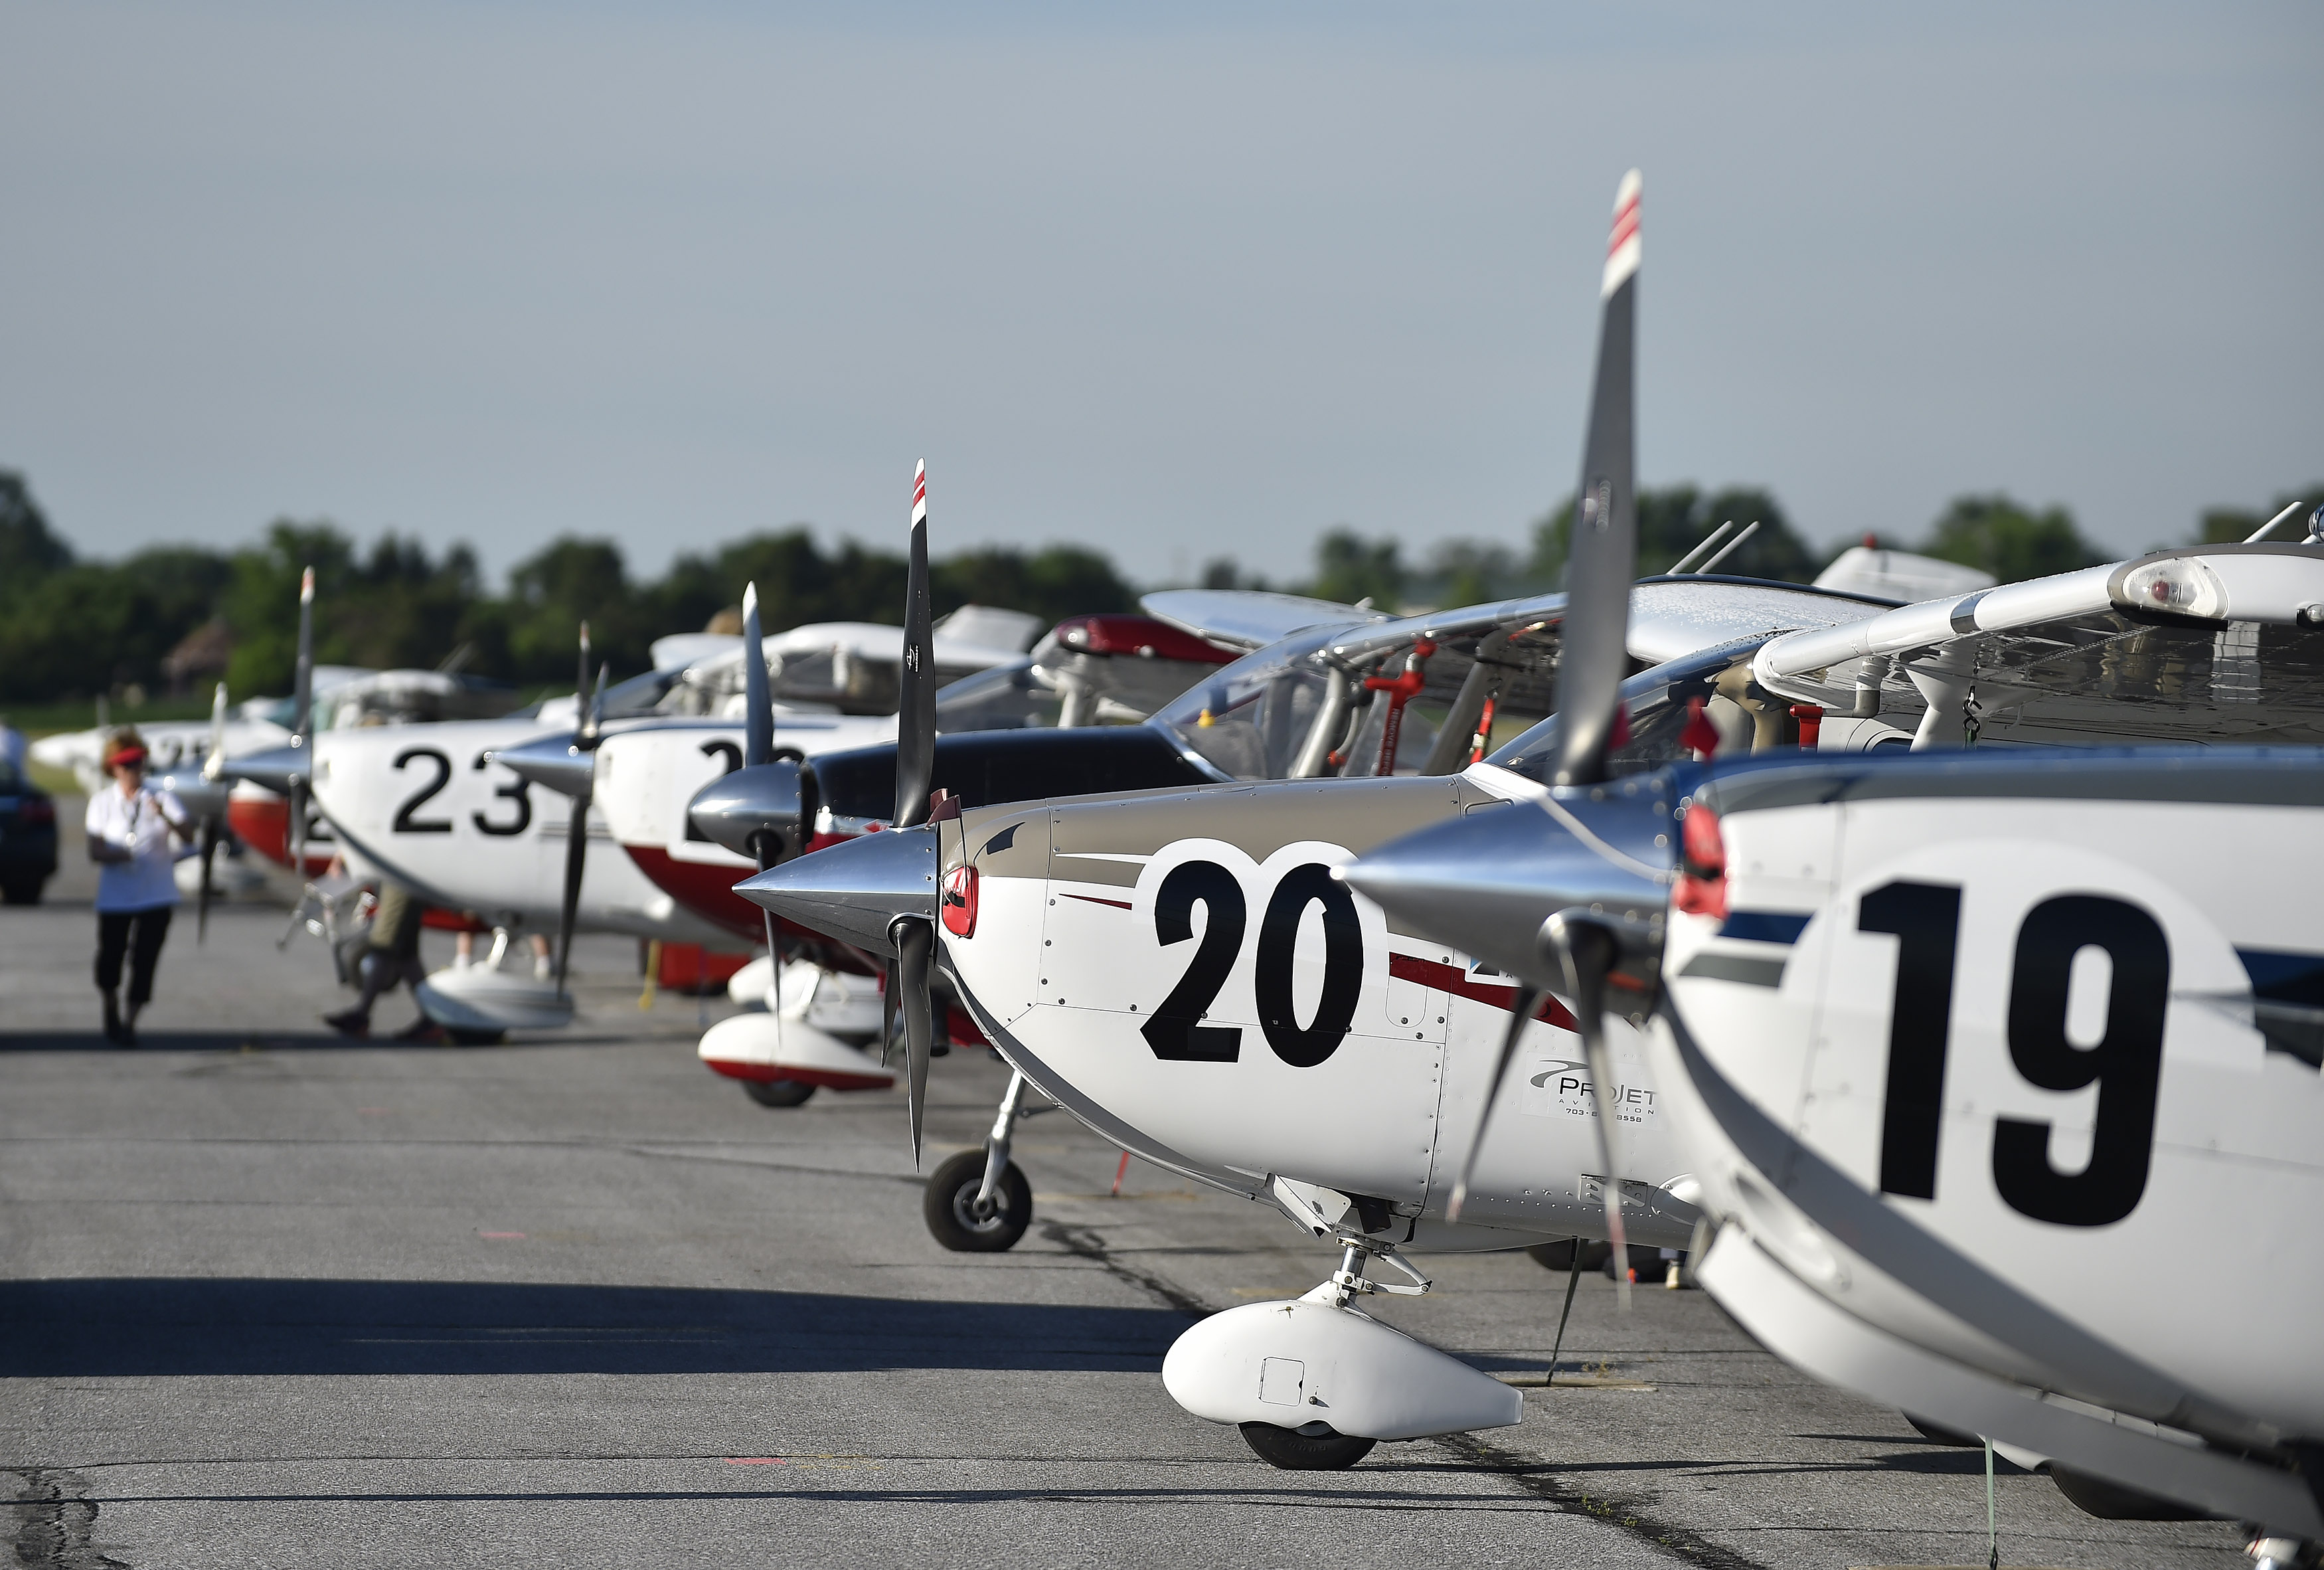 Air Race Classic aircraft are lined up and ready to start the 2017 race from Frederick, Maryland. In 2018, the teams will start in Texas and wind their way through the United States to end in Maine. Photo by David Tulis.